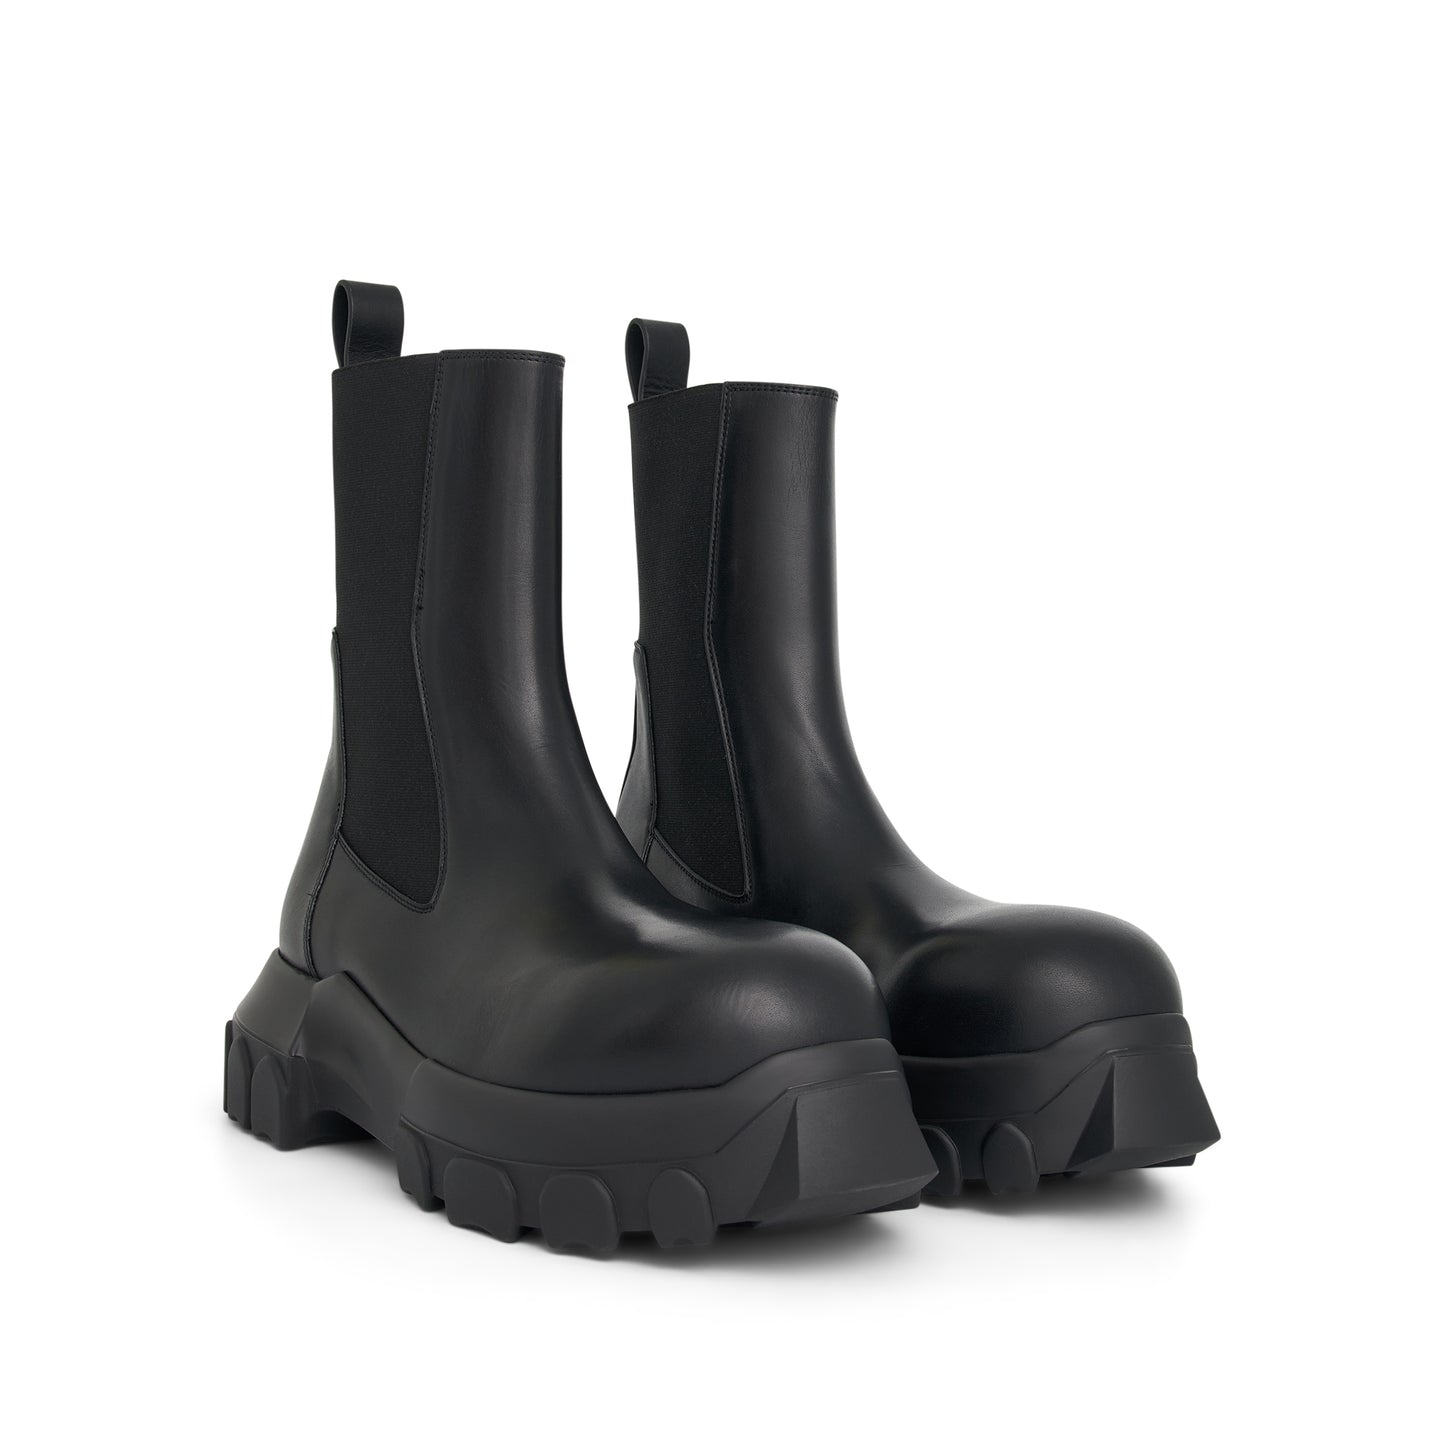 Washed Calf Beatle Bozo Tractor Boots in Black